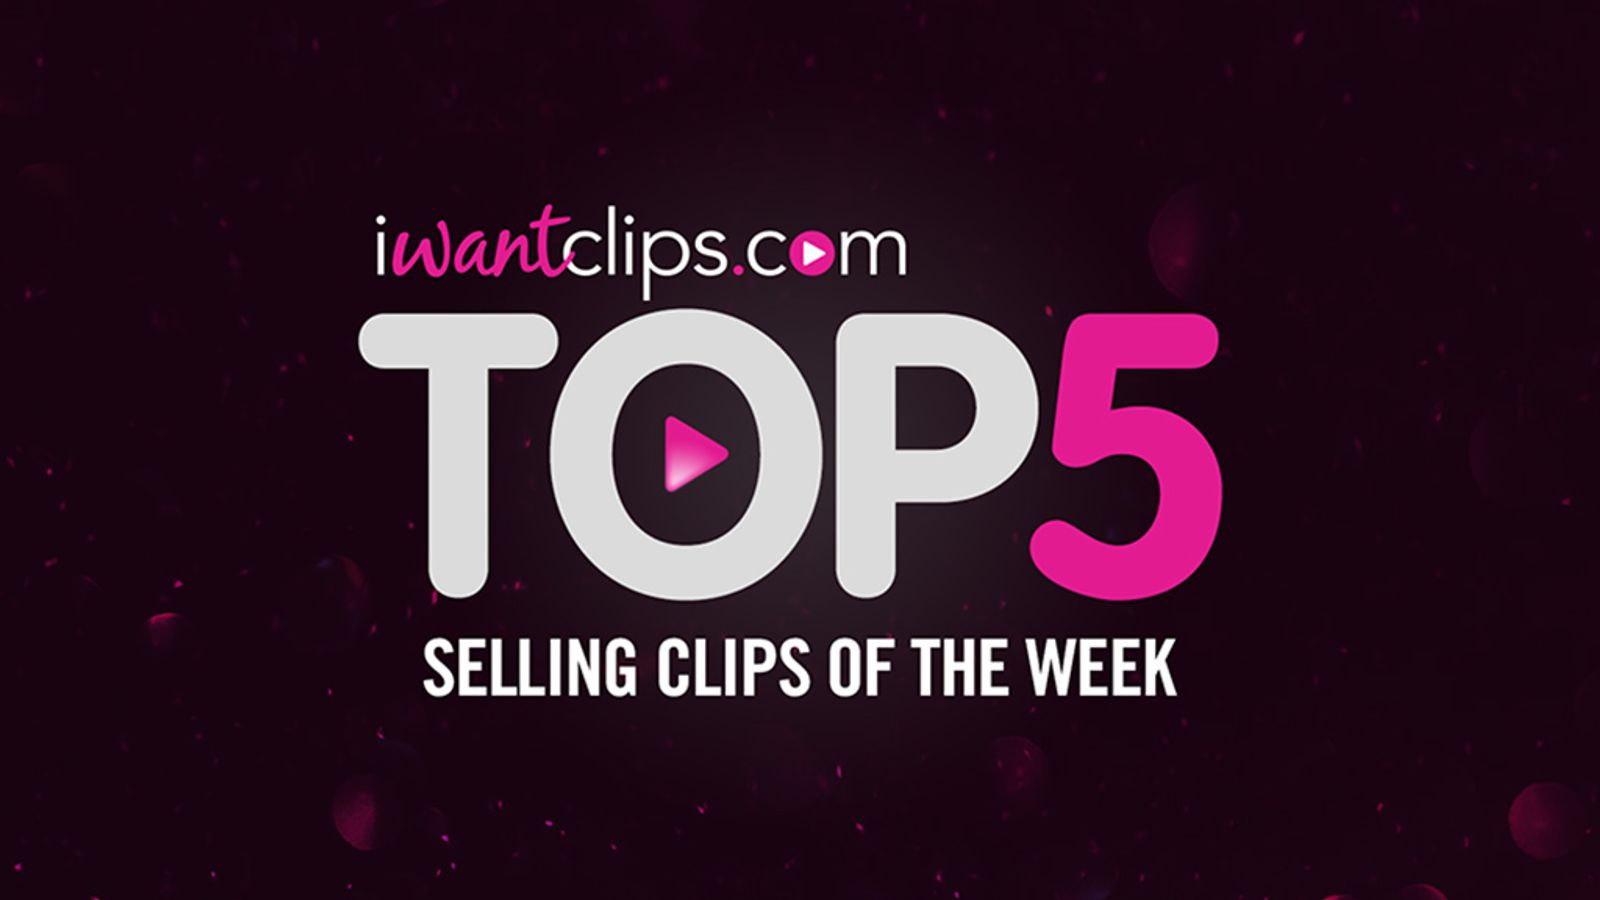 Foot Fetish, Body Worship Top the Charts on iWantClips